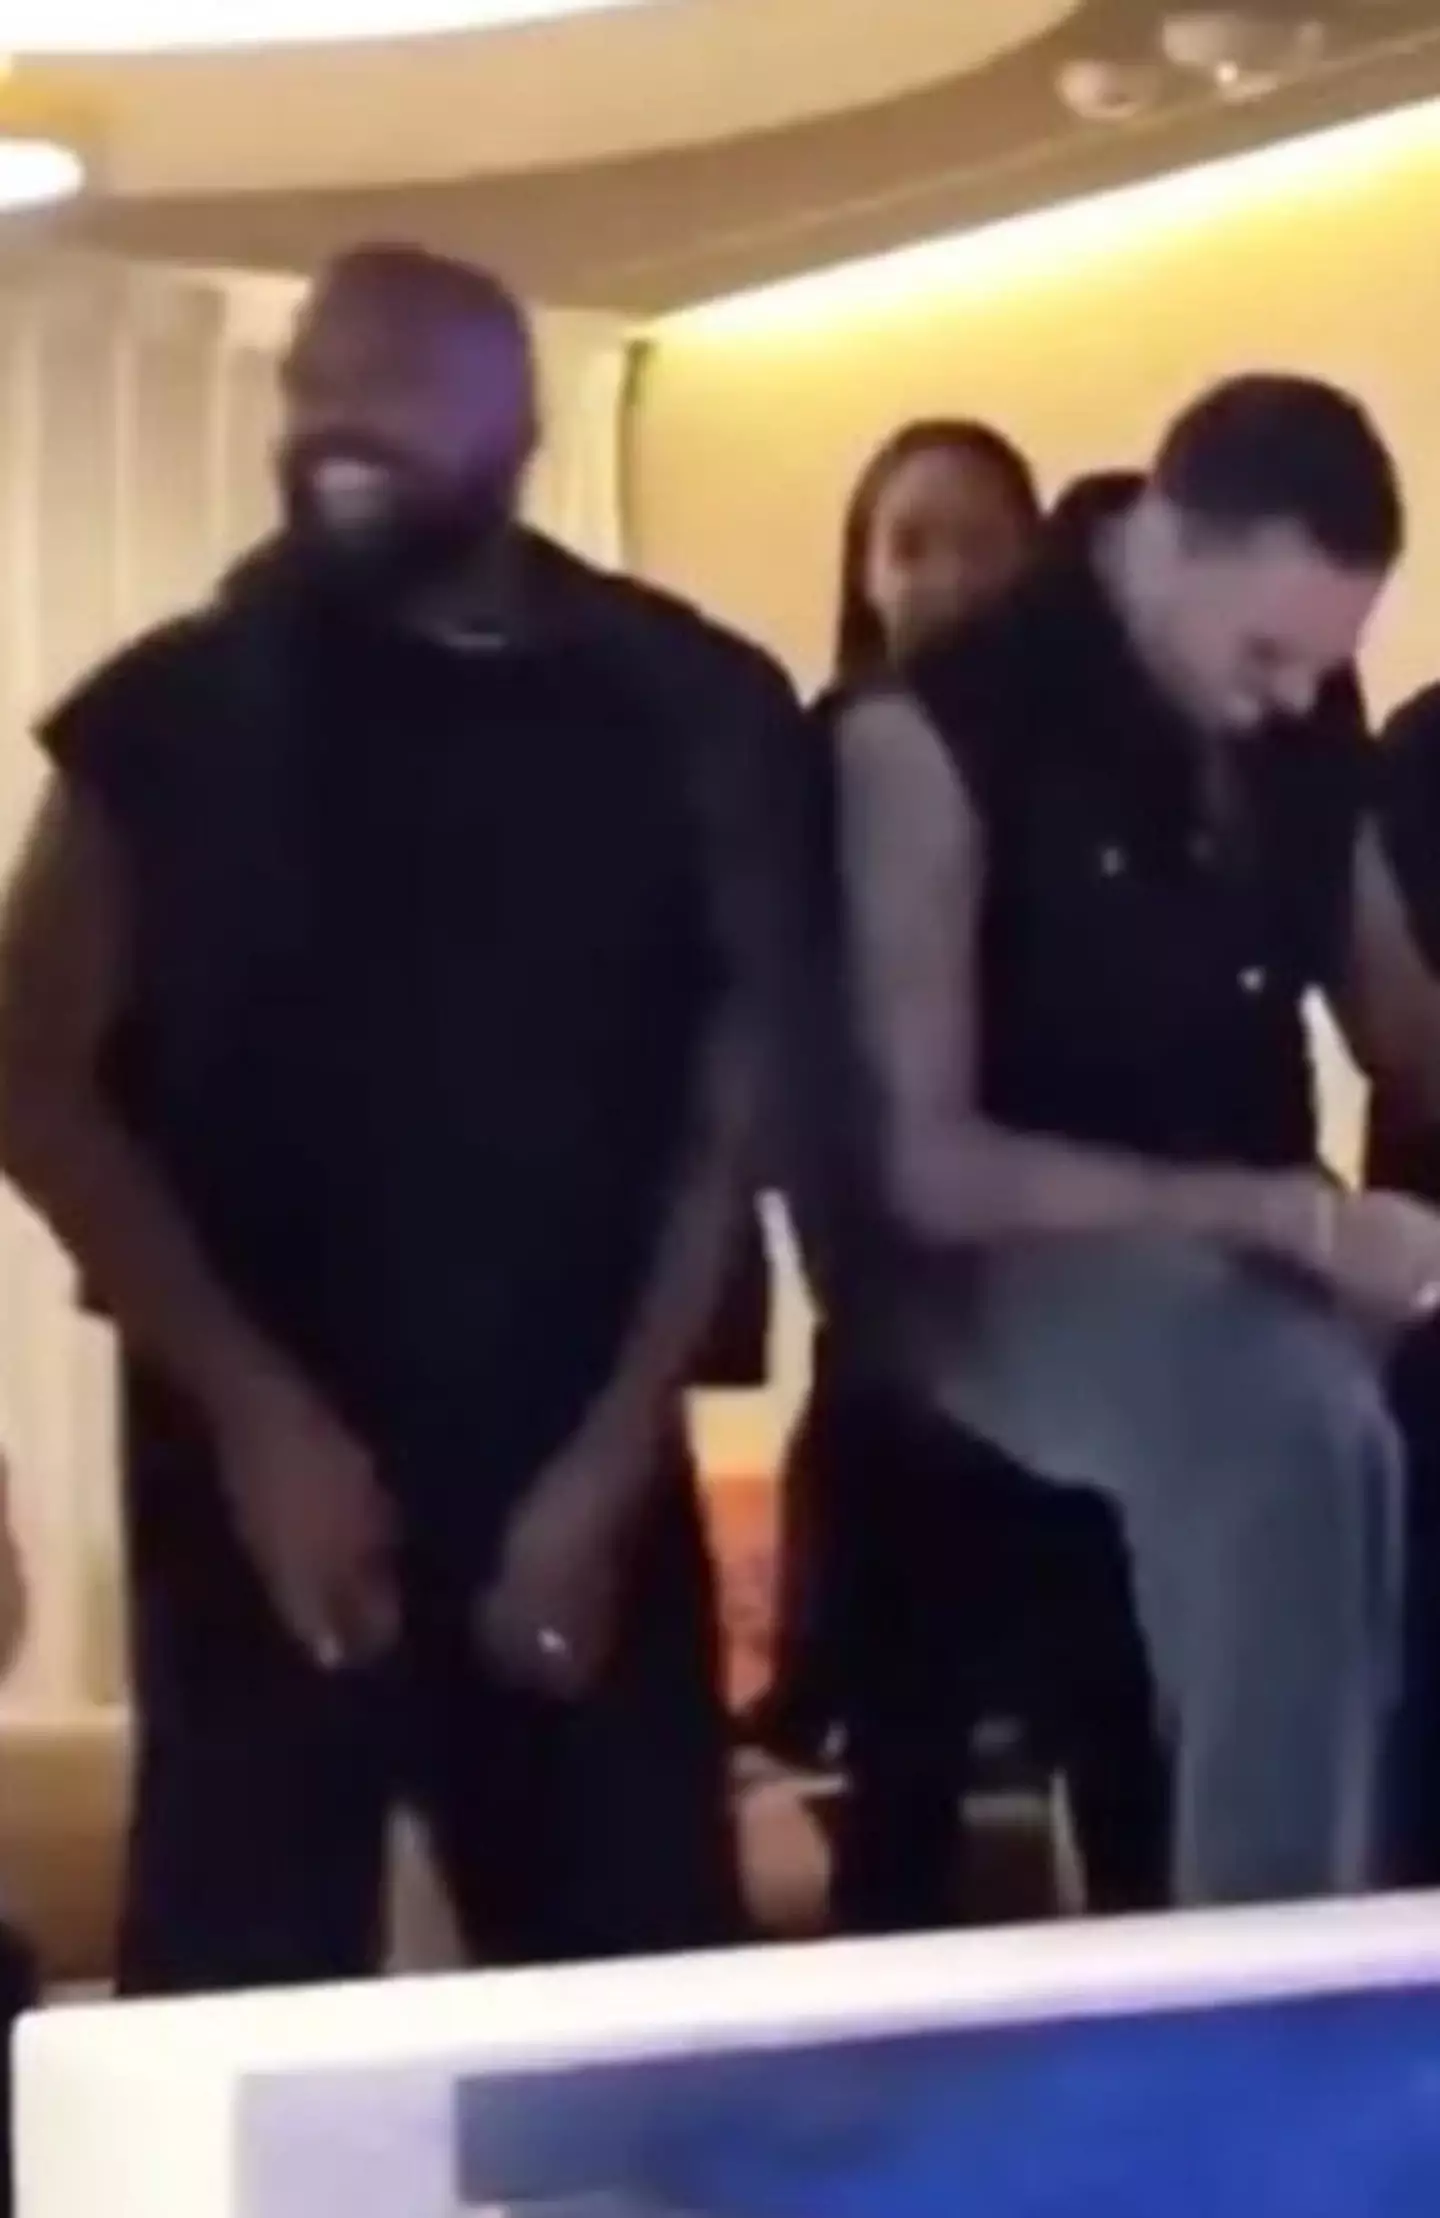 Both West and Brown were seen dancing to the track.